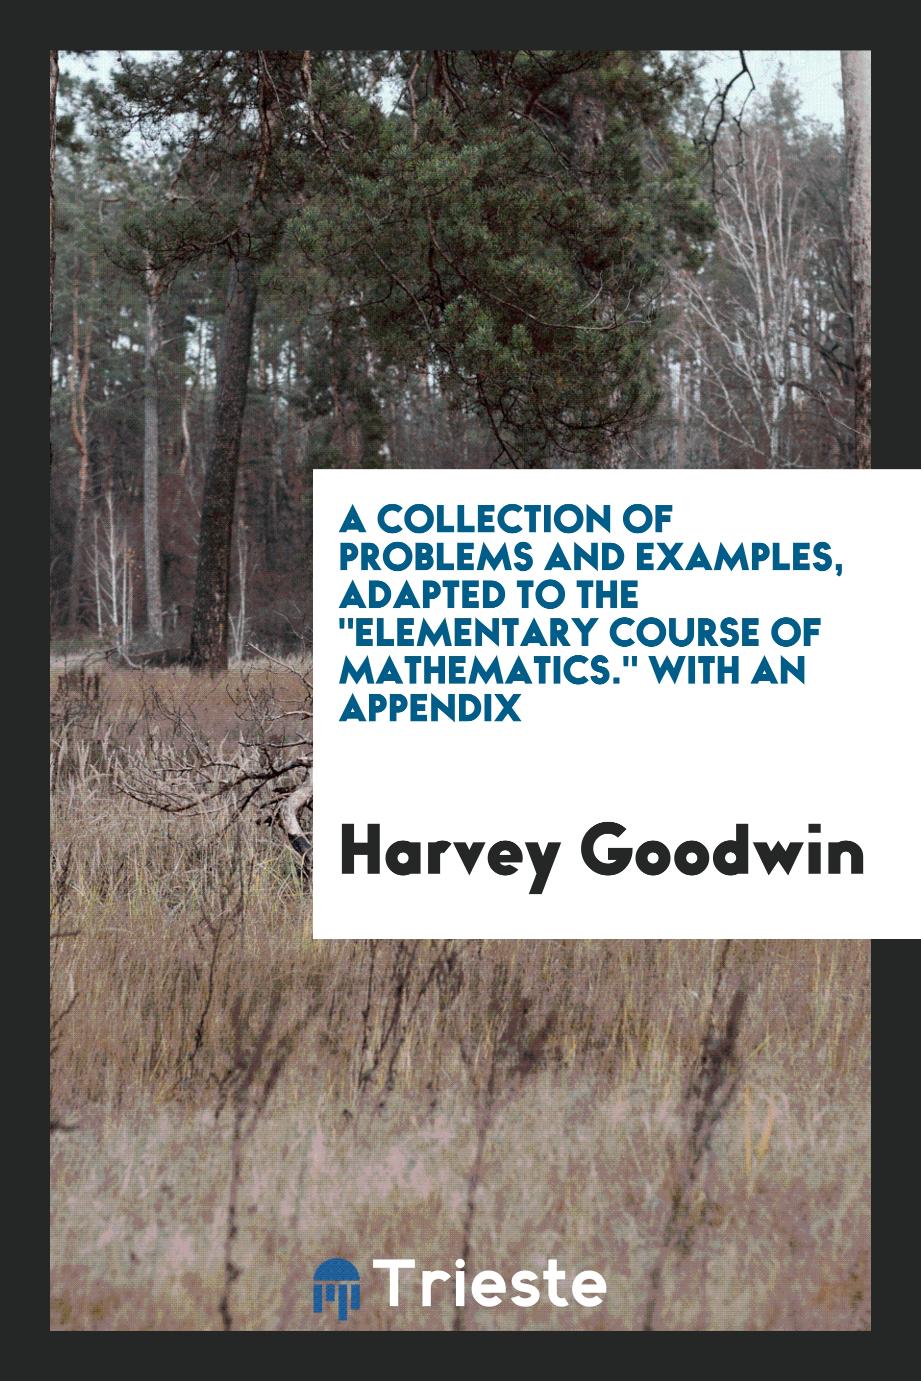 A Collection of Problems and Examples, Adapted to the "Elementary Course of Mathematics." With an Appendix